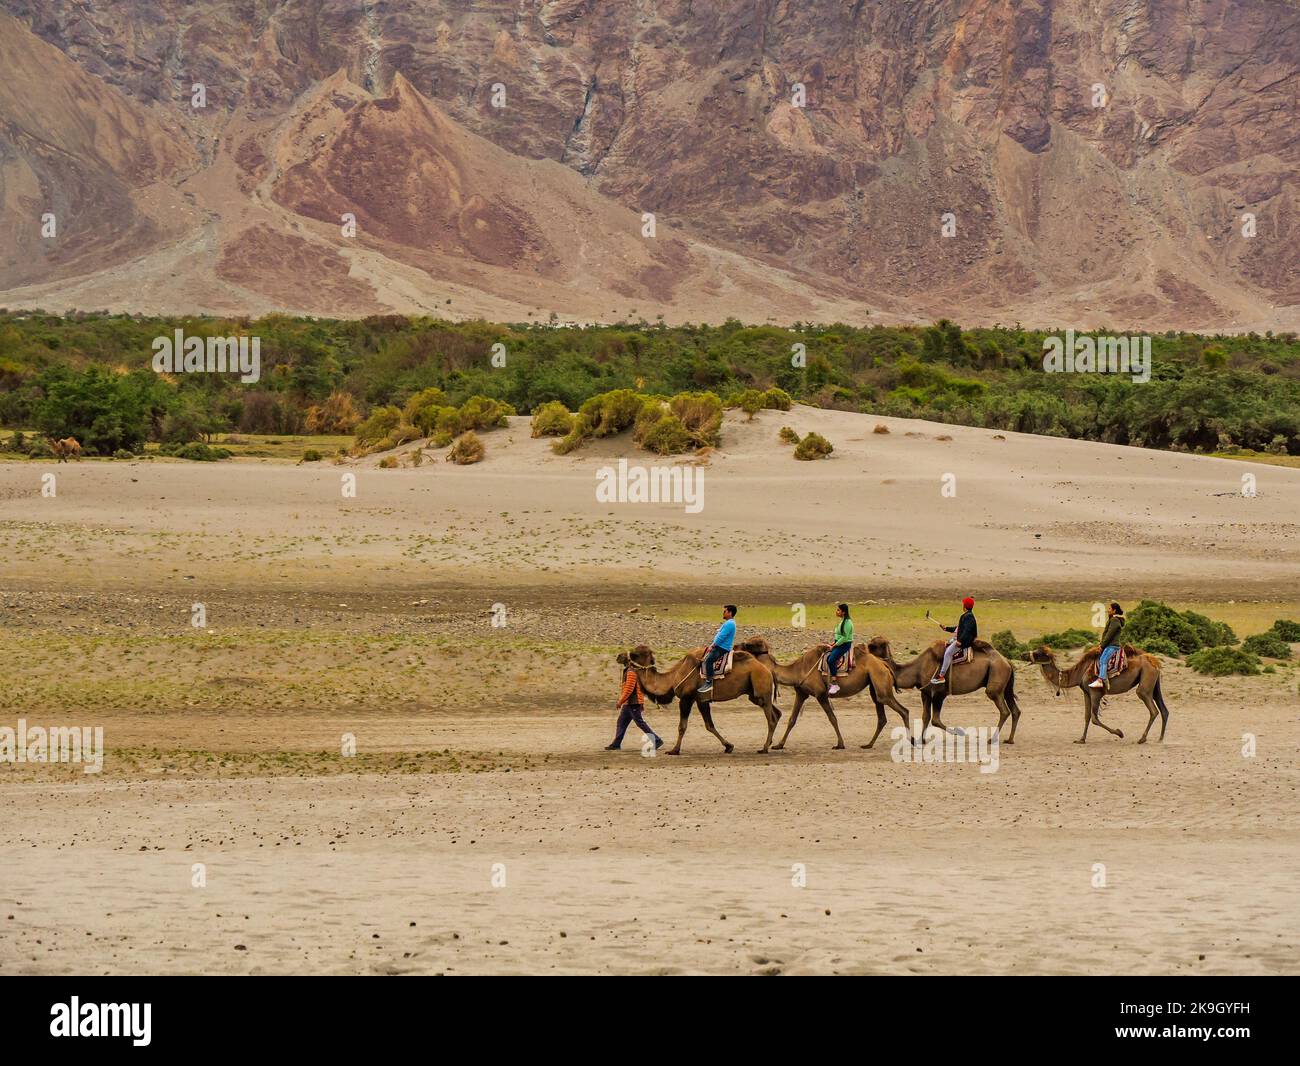 Ladakh, India - June 18, 2022 : Hunder is a village in Leh district of Ladakh, India famous for Sand dunes, Bactrian camels. Tourists love to take ari Stock Photo